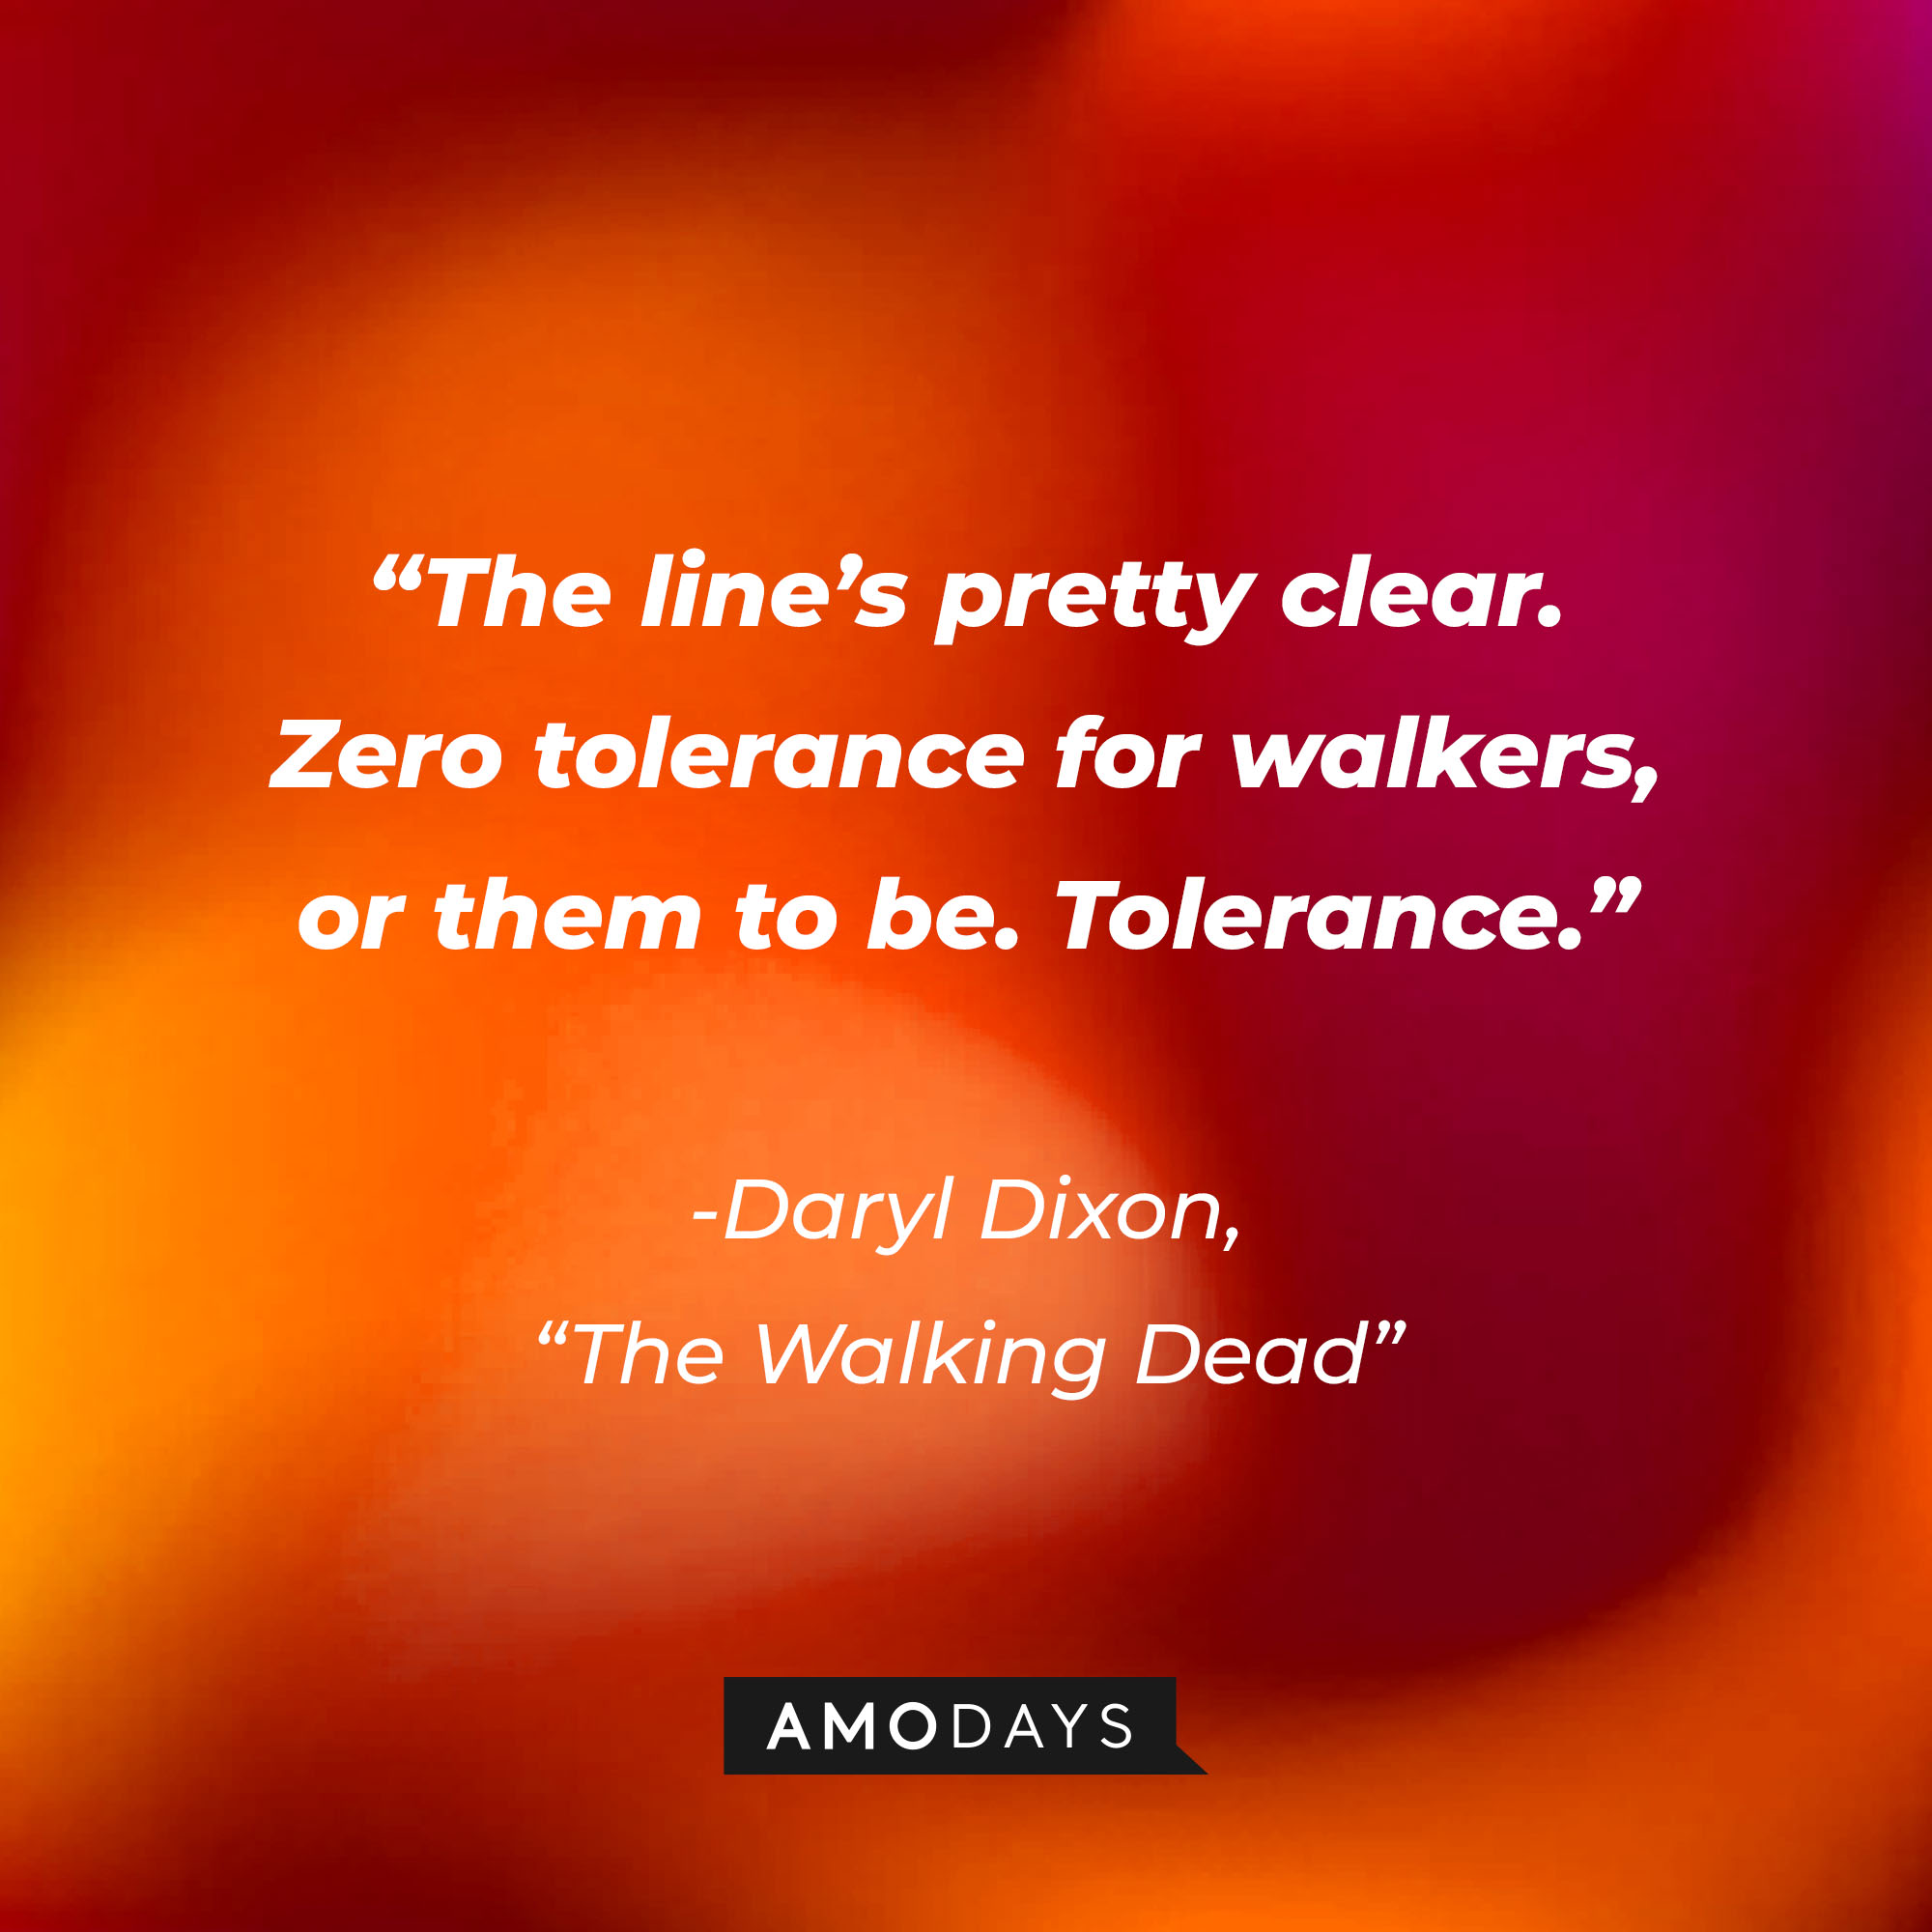 Daryl Dixon’s quote from “The Walking Dead”: “The line’s pretty clear. Zero tolerance for walkers, or them to be. Tolerance.” | Source: AmoDays